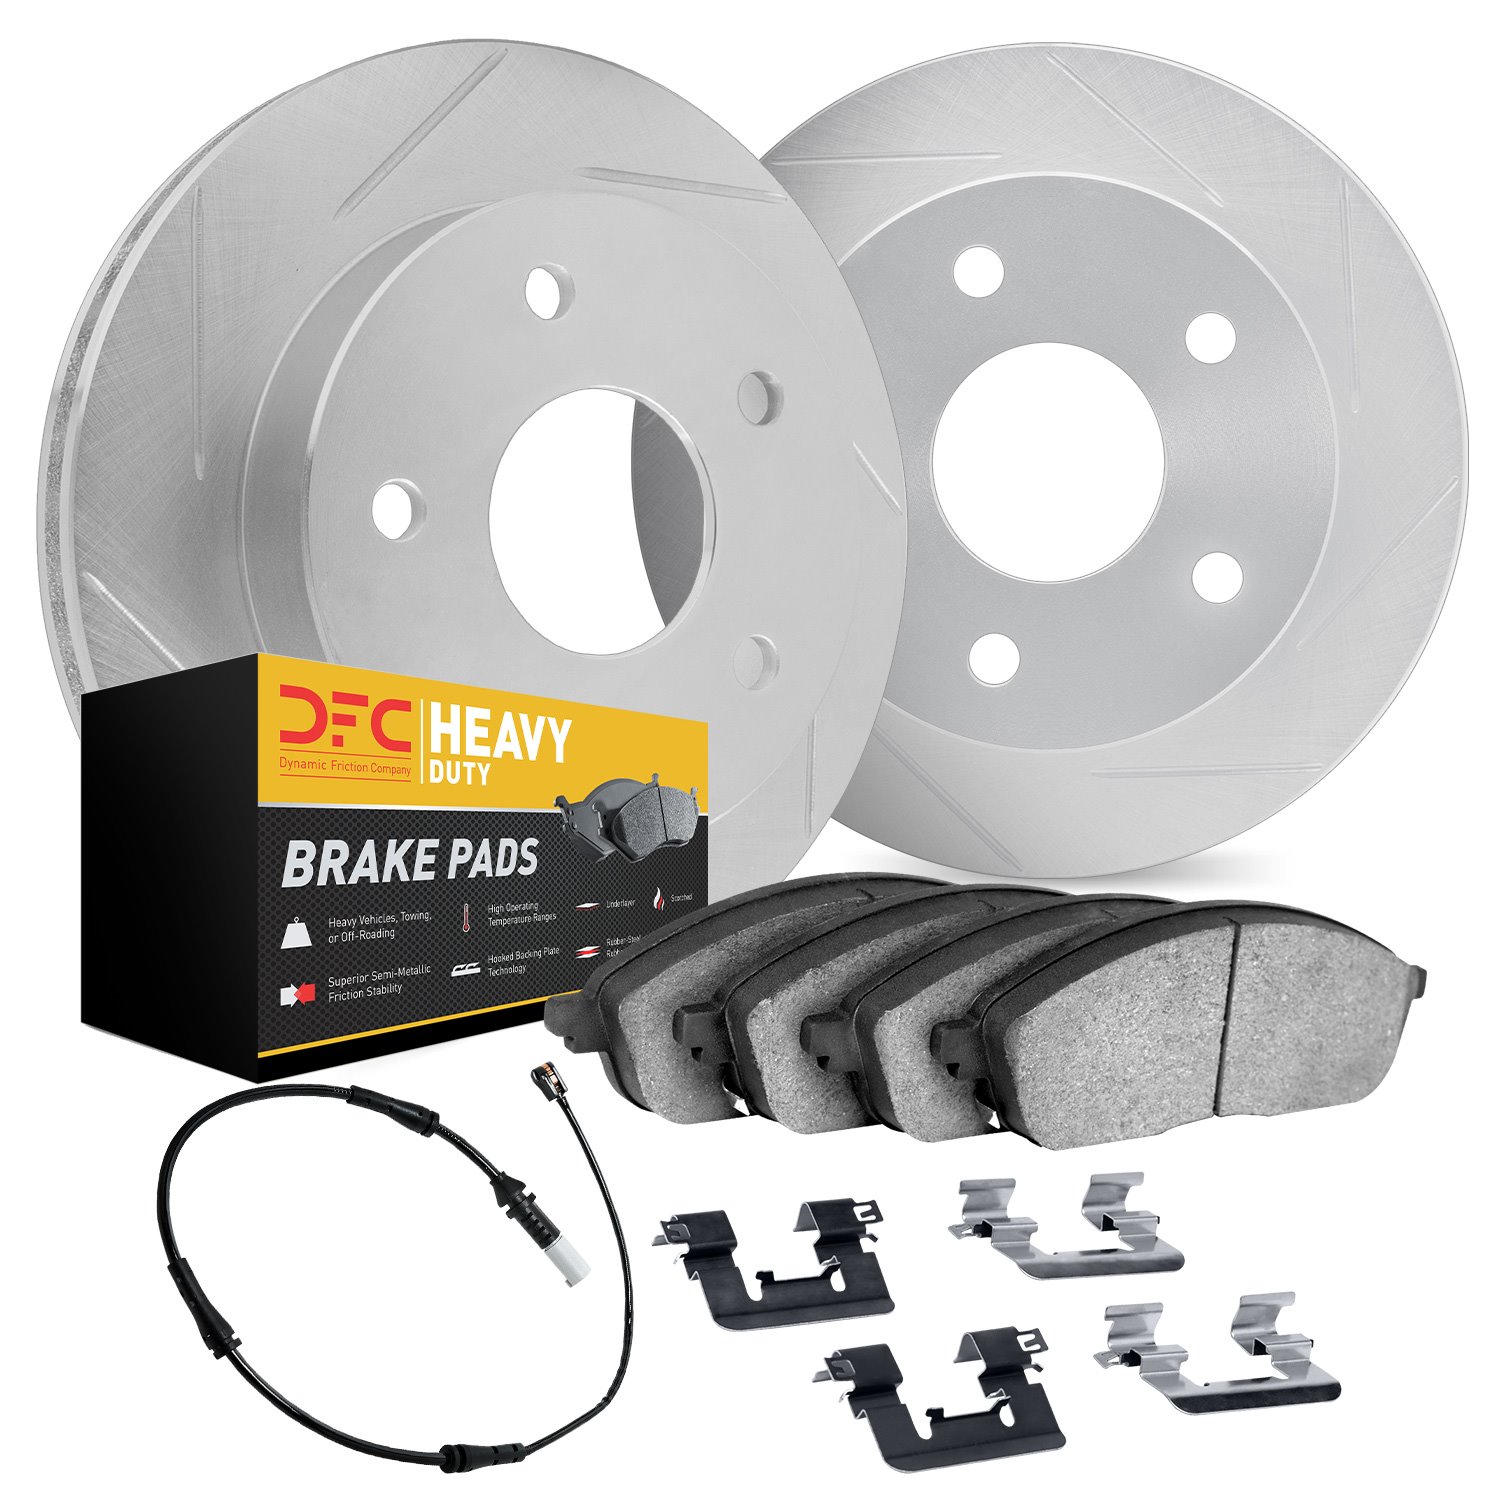 5222-63154 Slotted Brake Rotors w/Heavy-Duty Brake Pads Kits [Silver] includes Sensor & Hardware, Fits Select Mercedes-Benz, Pos